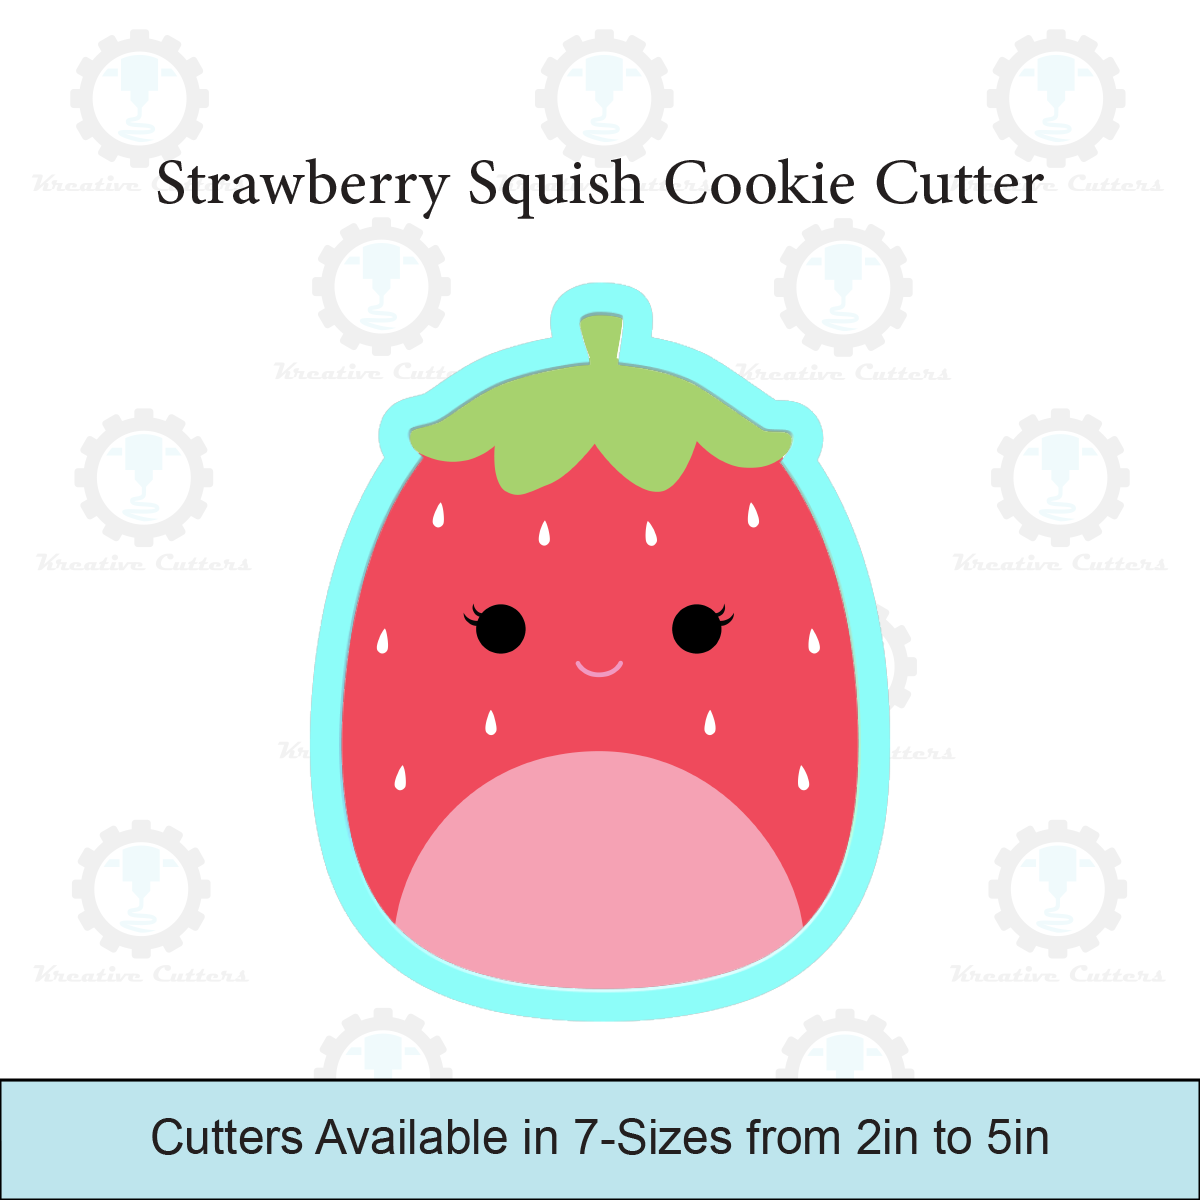 Strawberry Squish Cookie Cutters